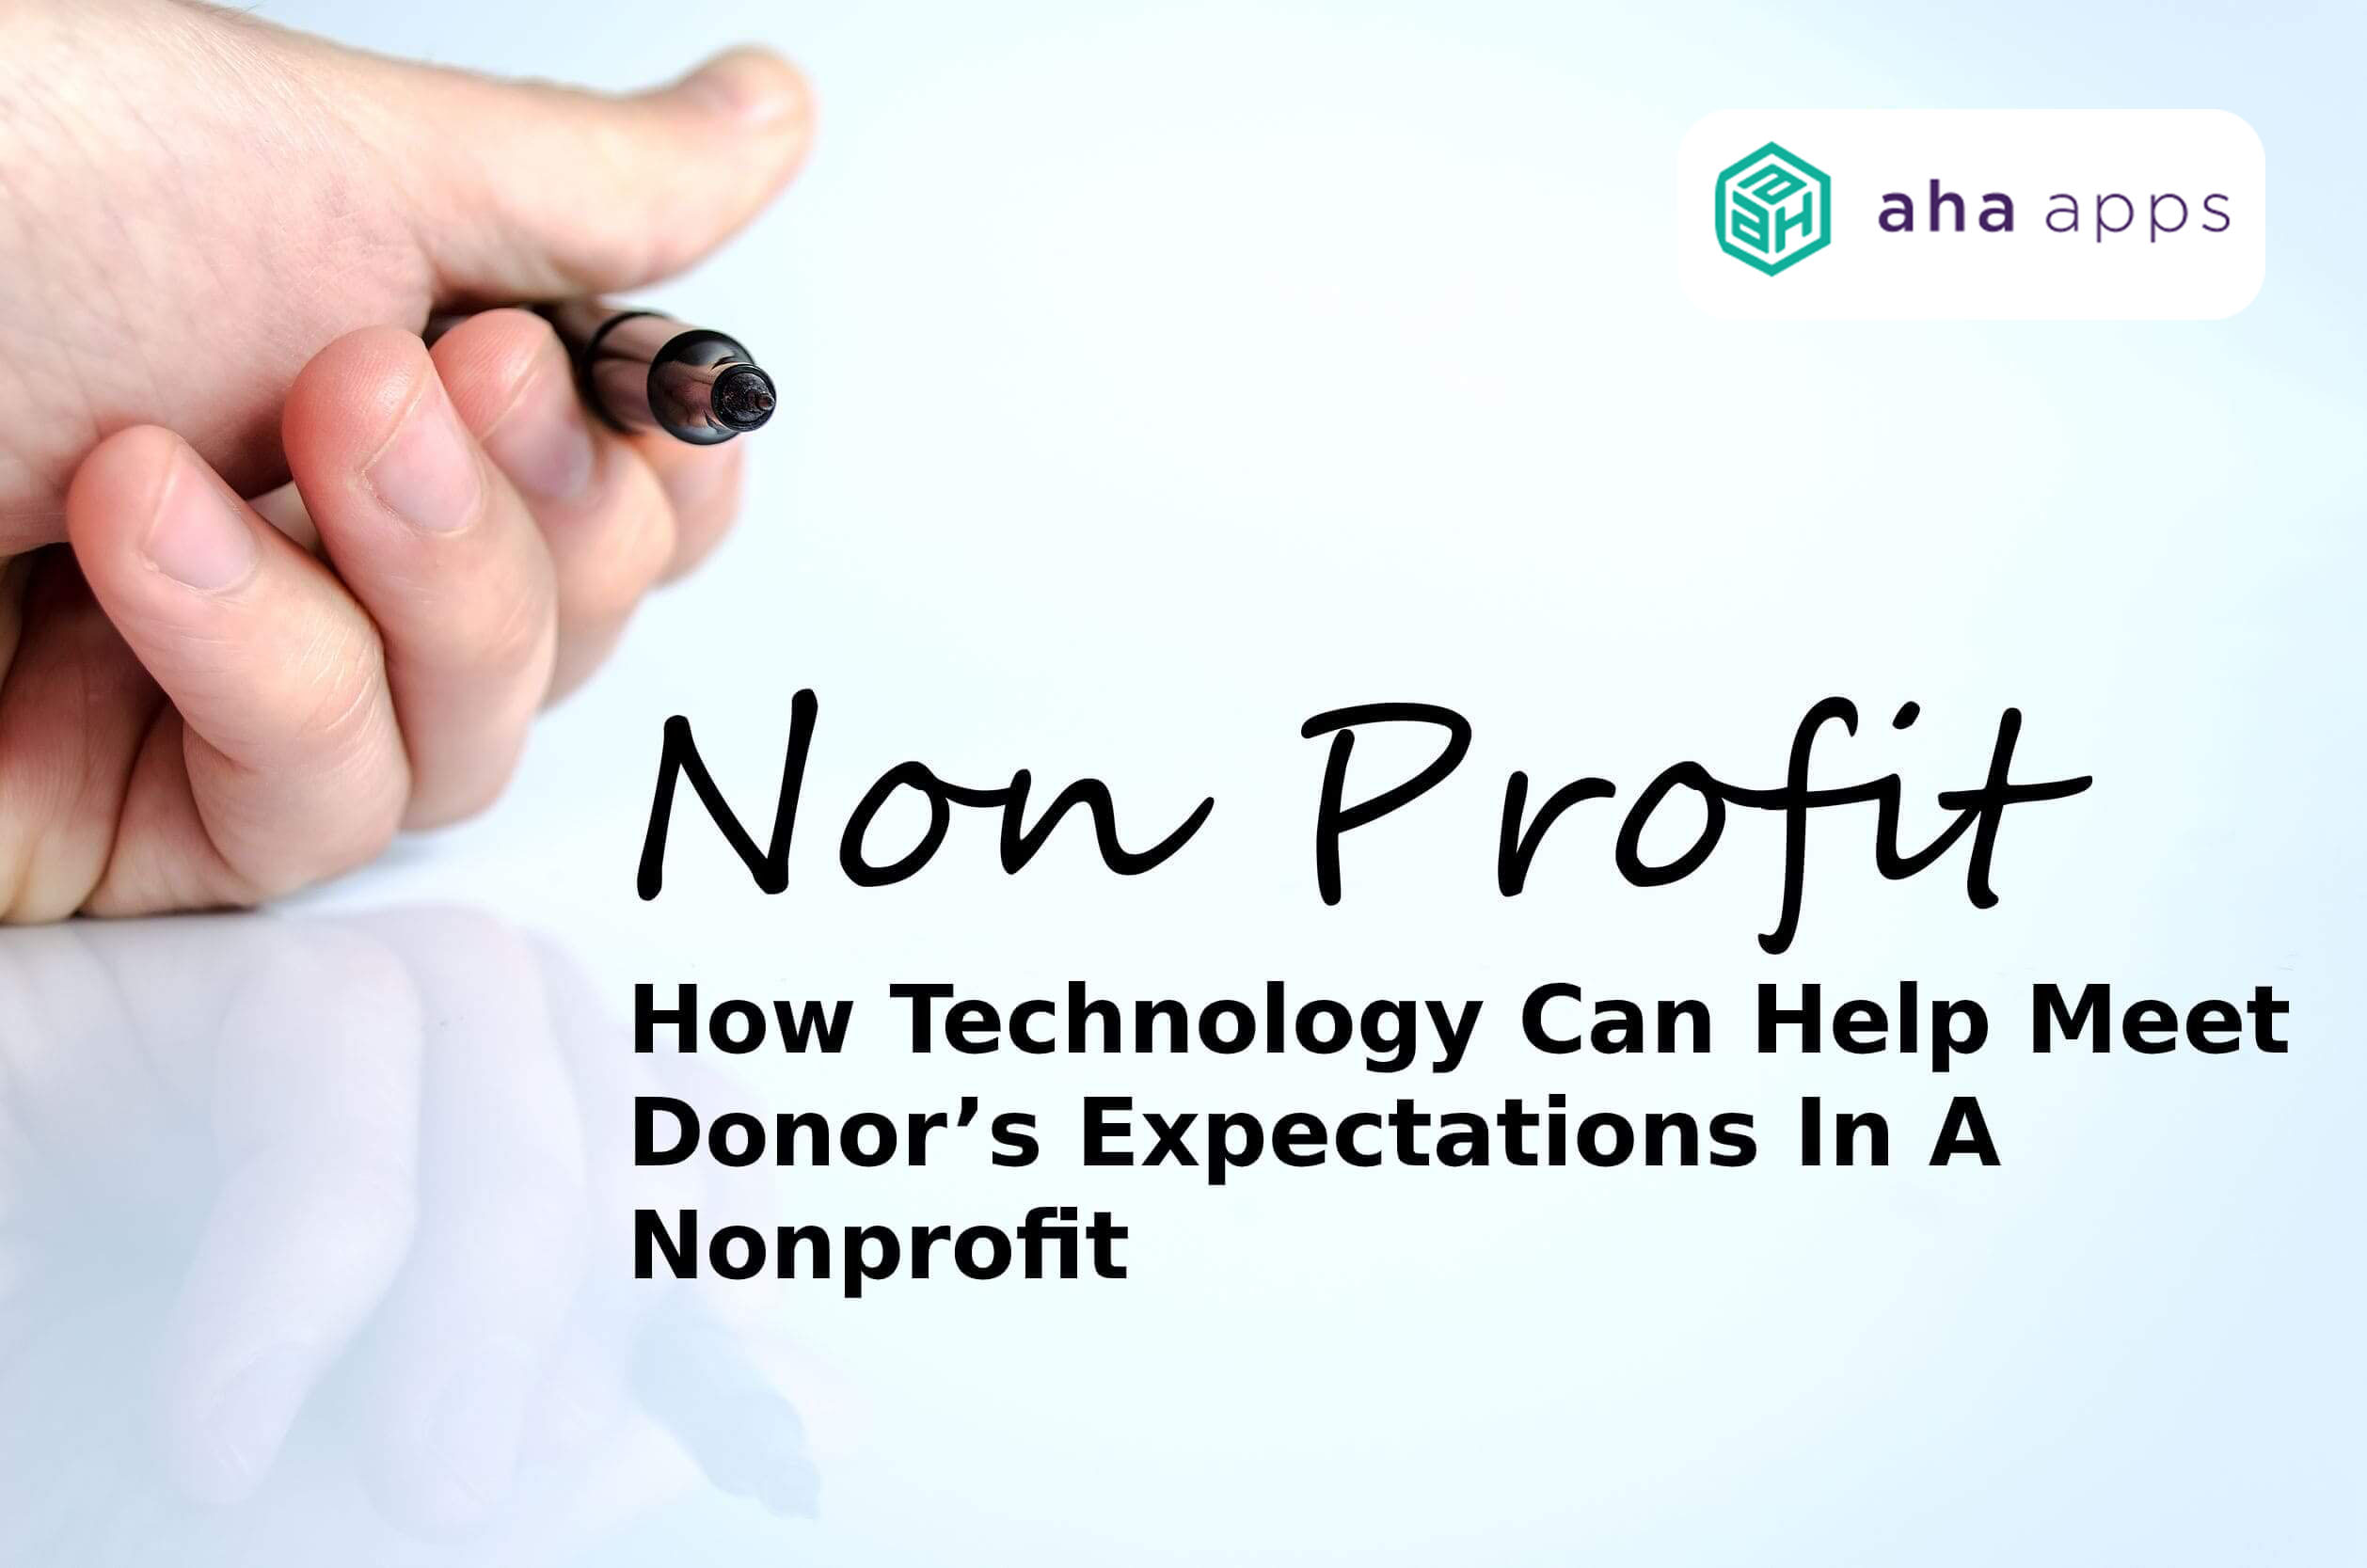 Meet donor’s expectations in a nonprofit - AhaApps